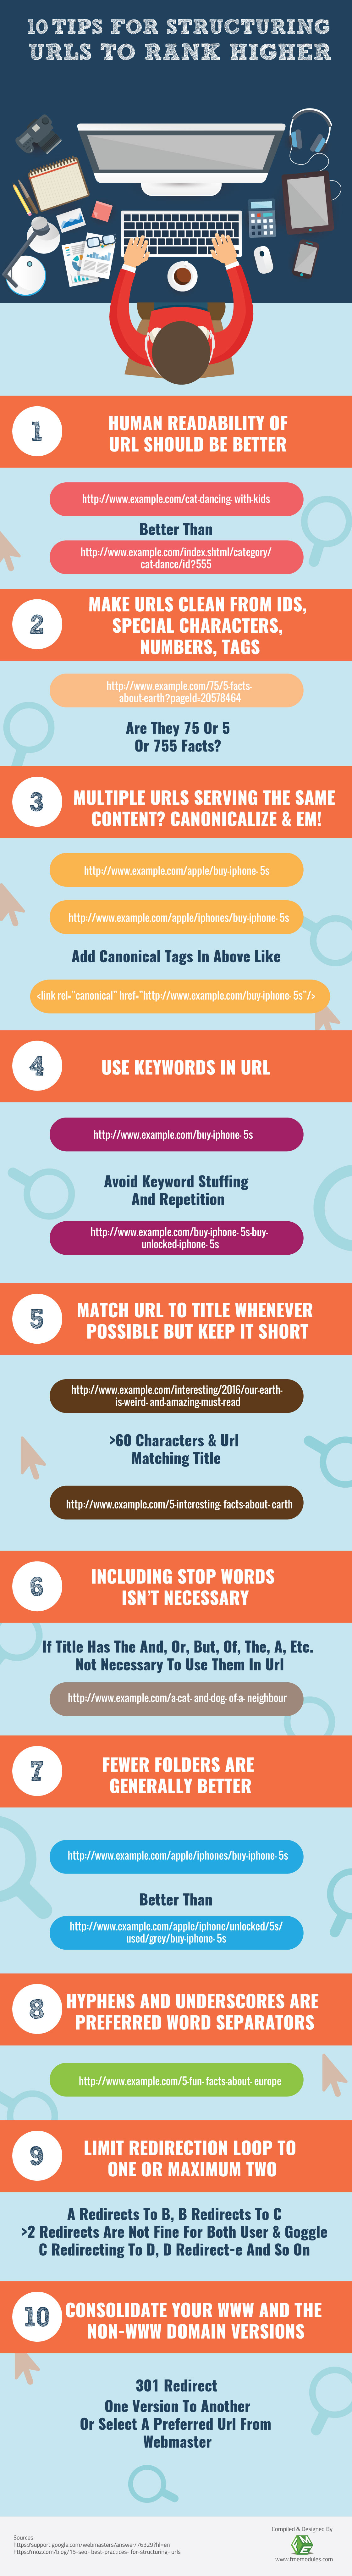 URL structure infographic